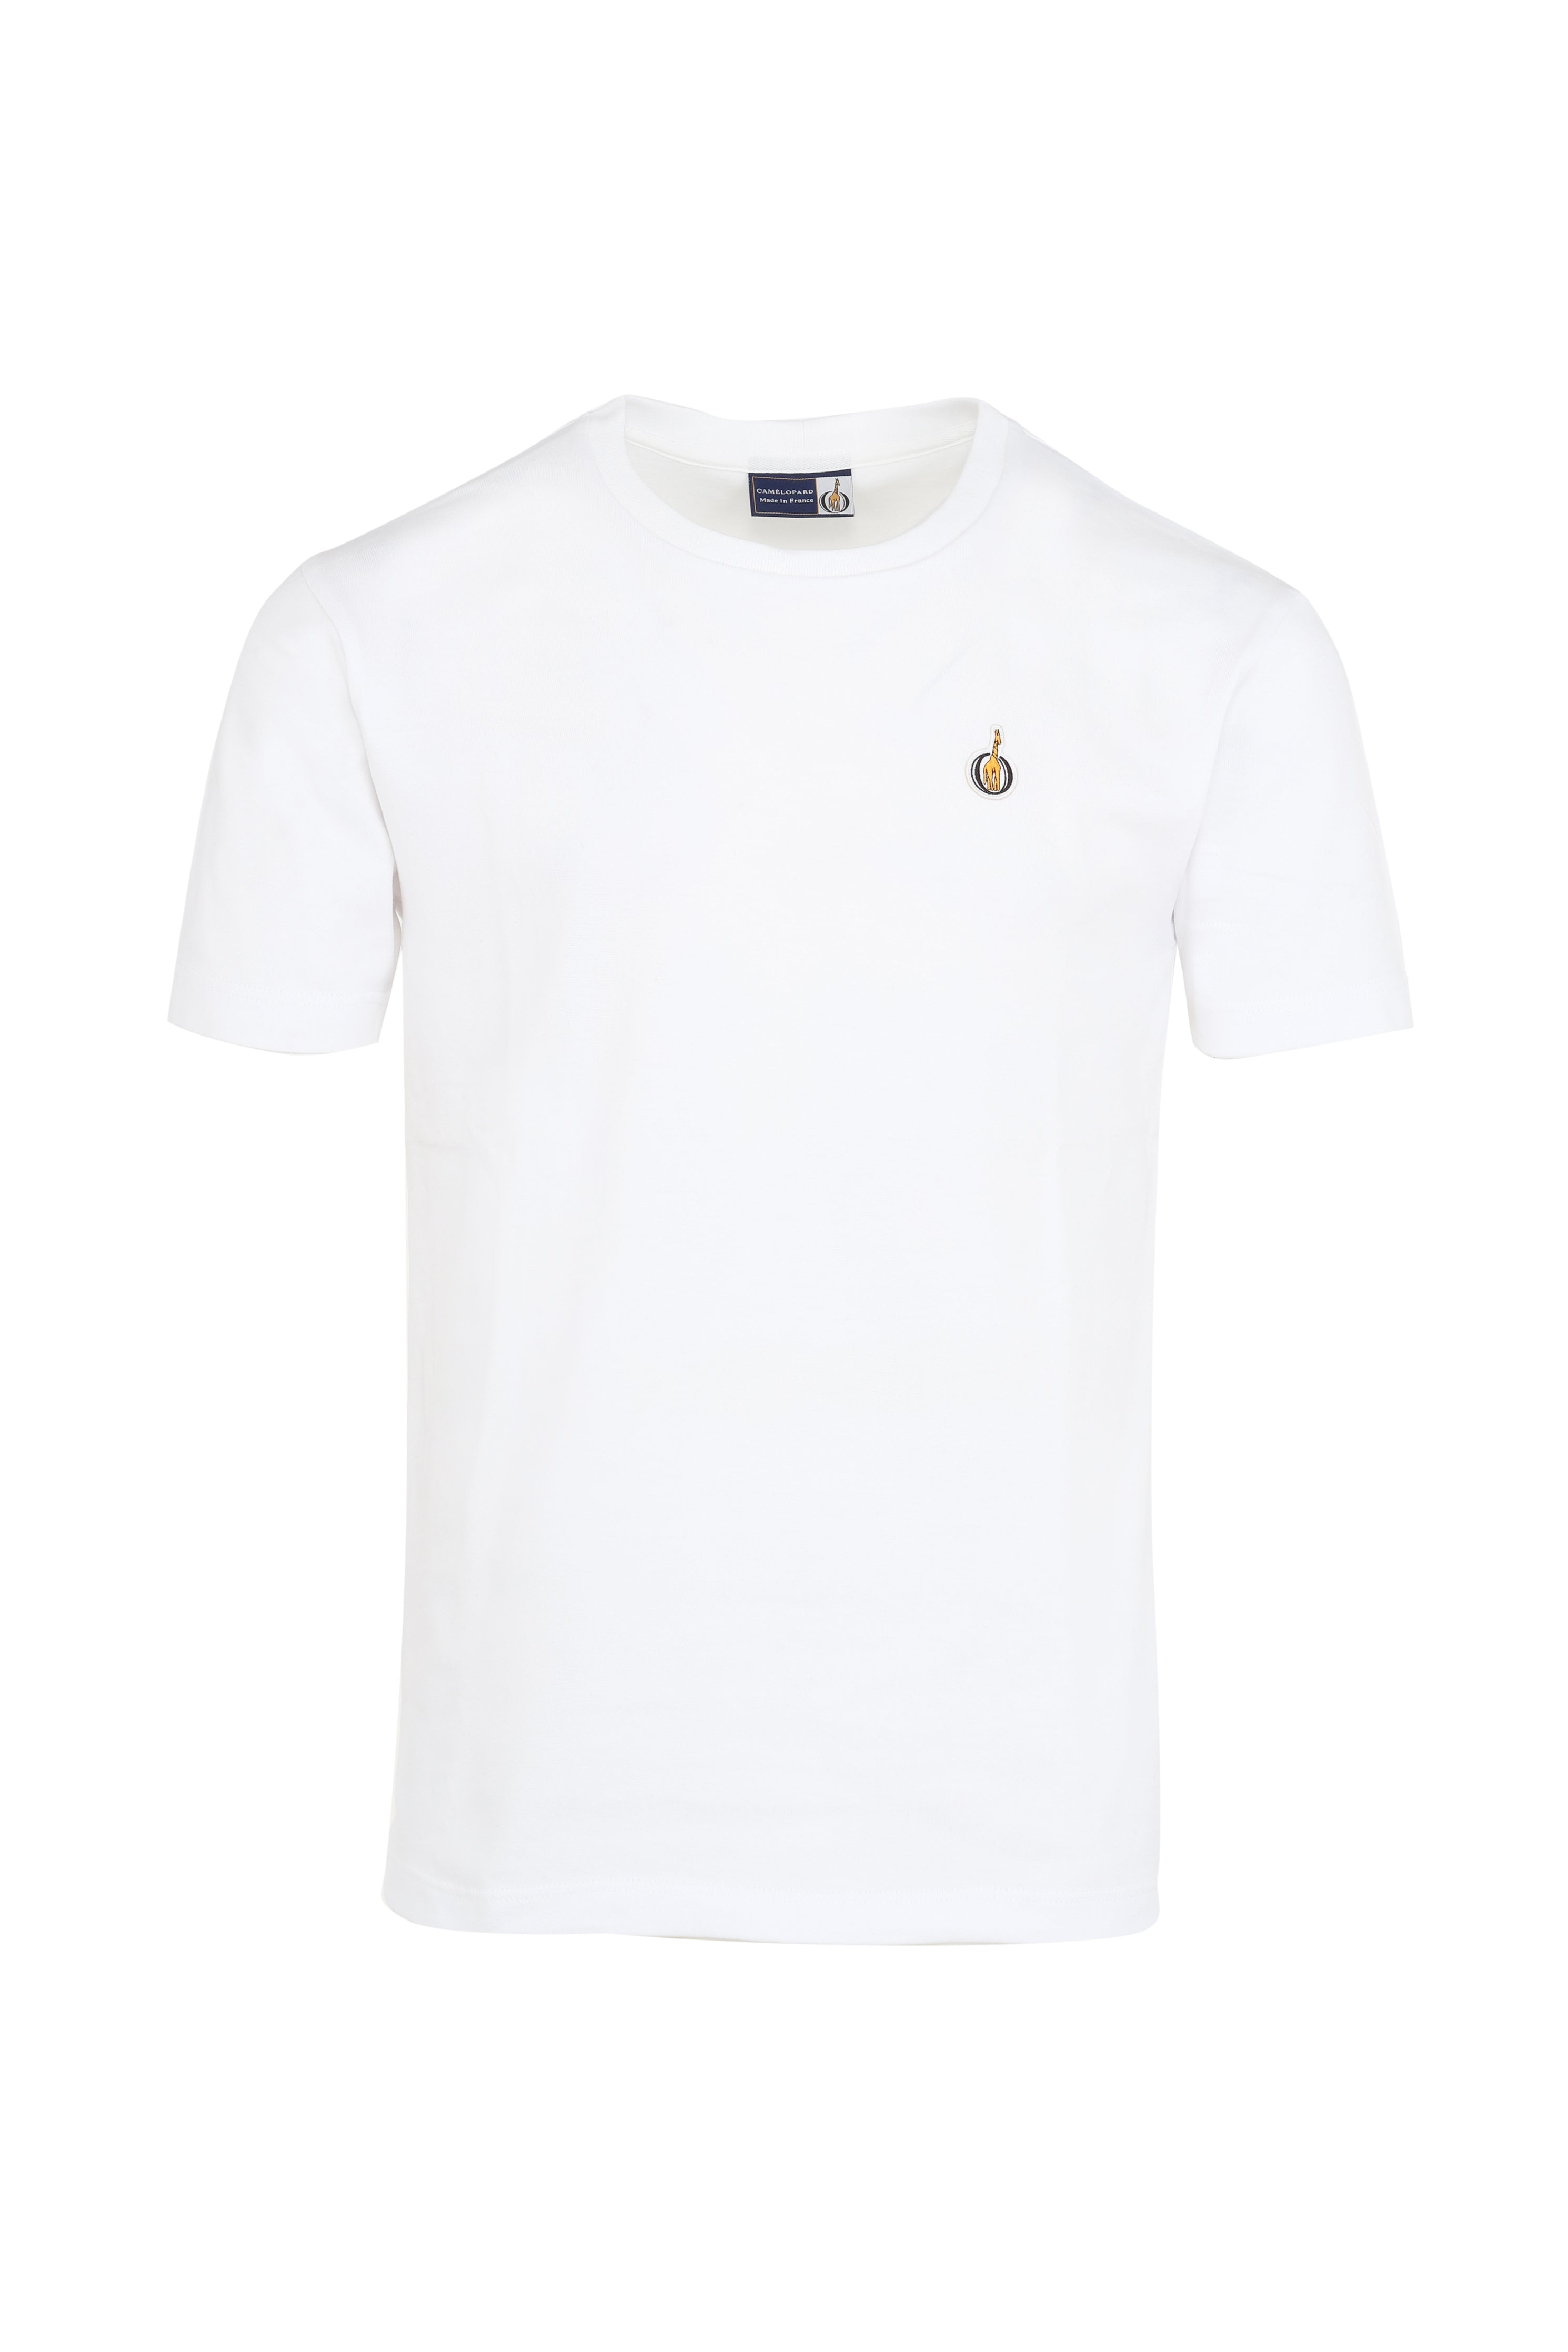 Men's white cotton T-shirt Made In France - embroidered giraffe